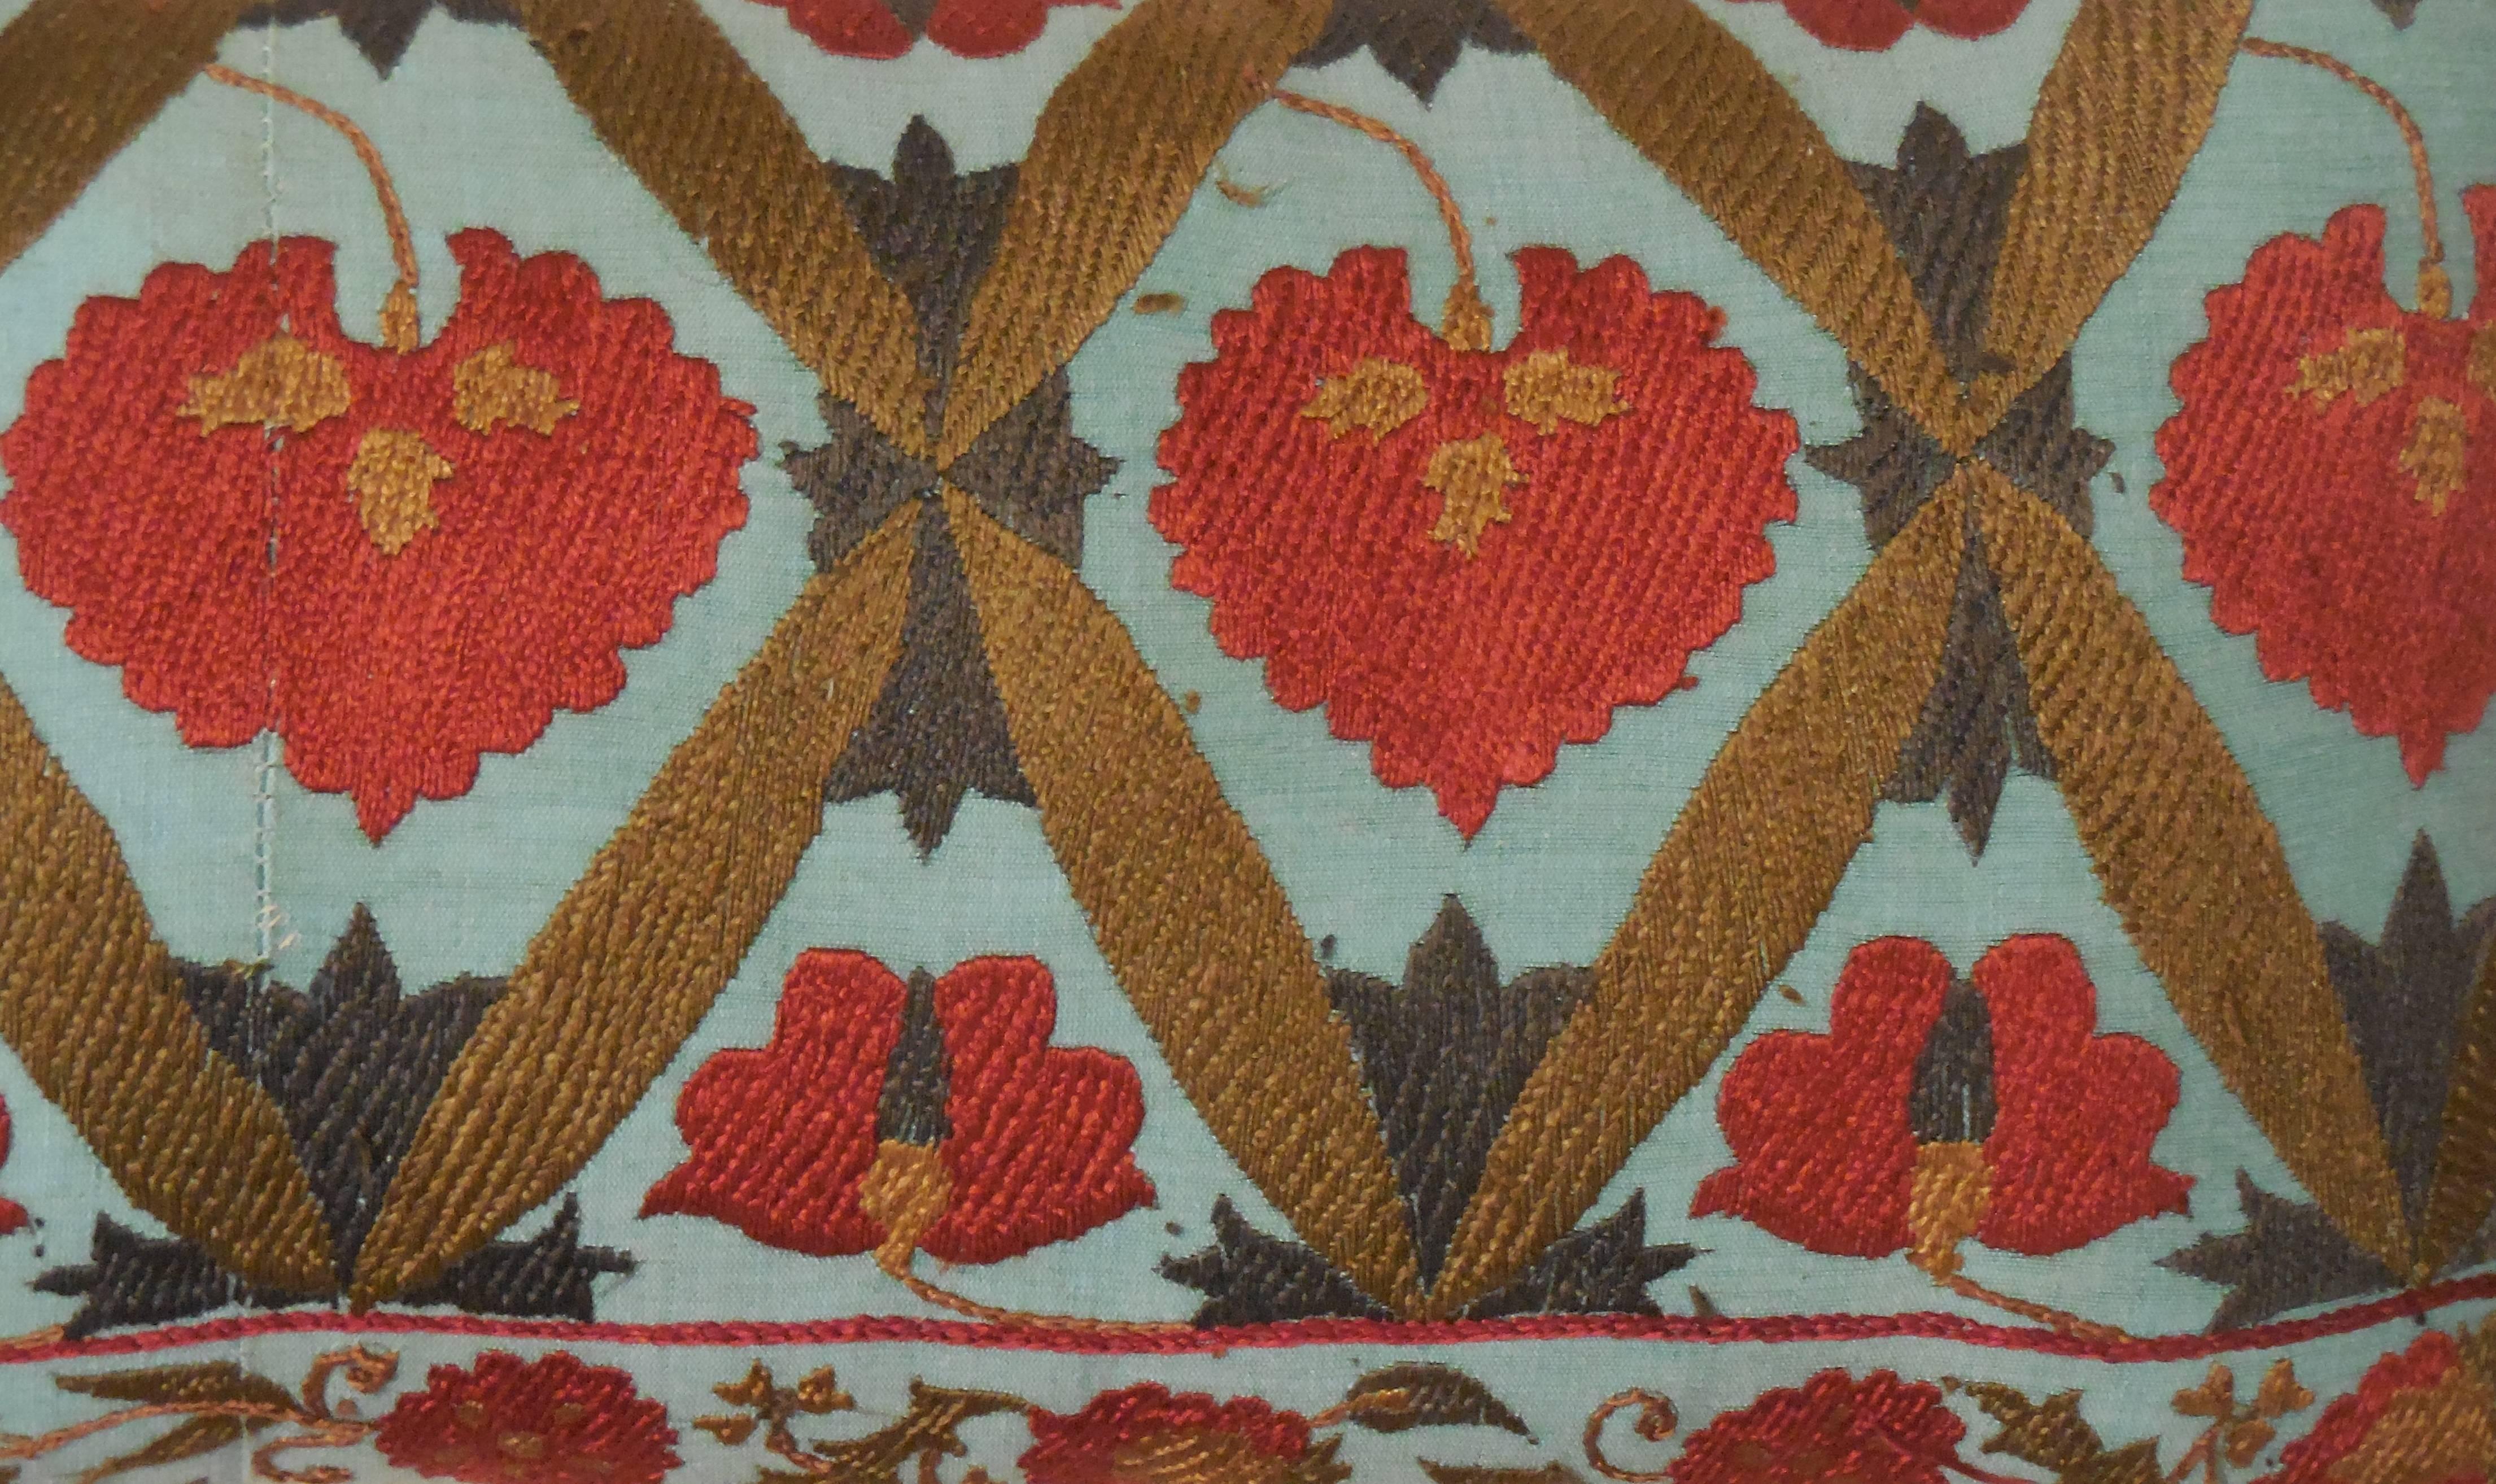 Pair of Suzani Embroidery Pillows 2